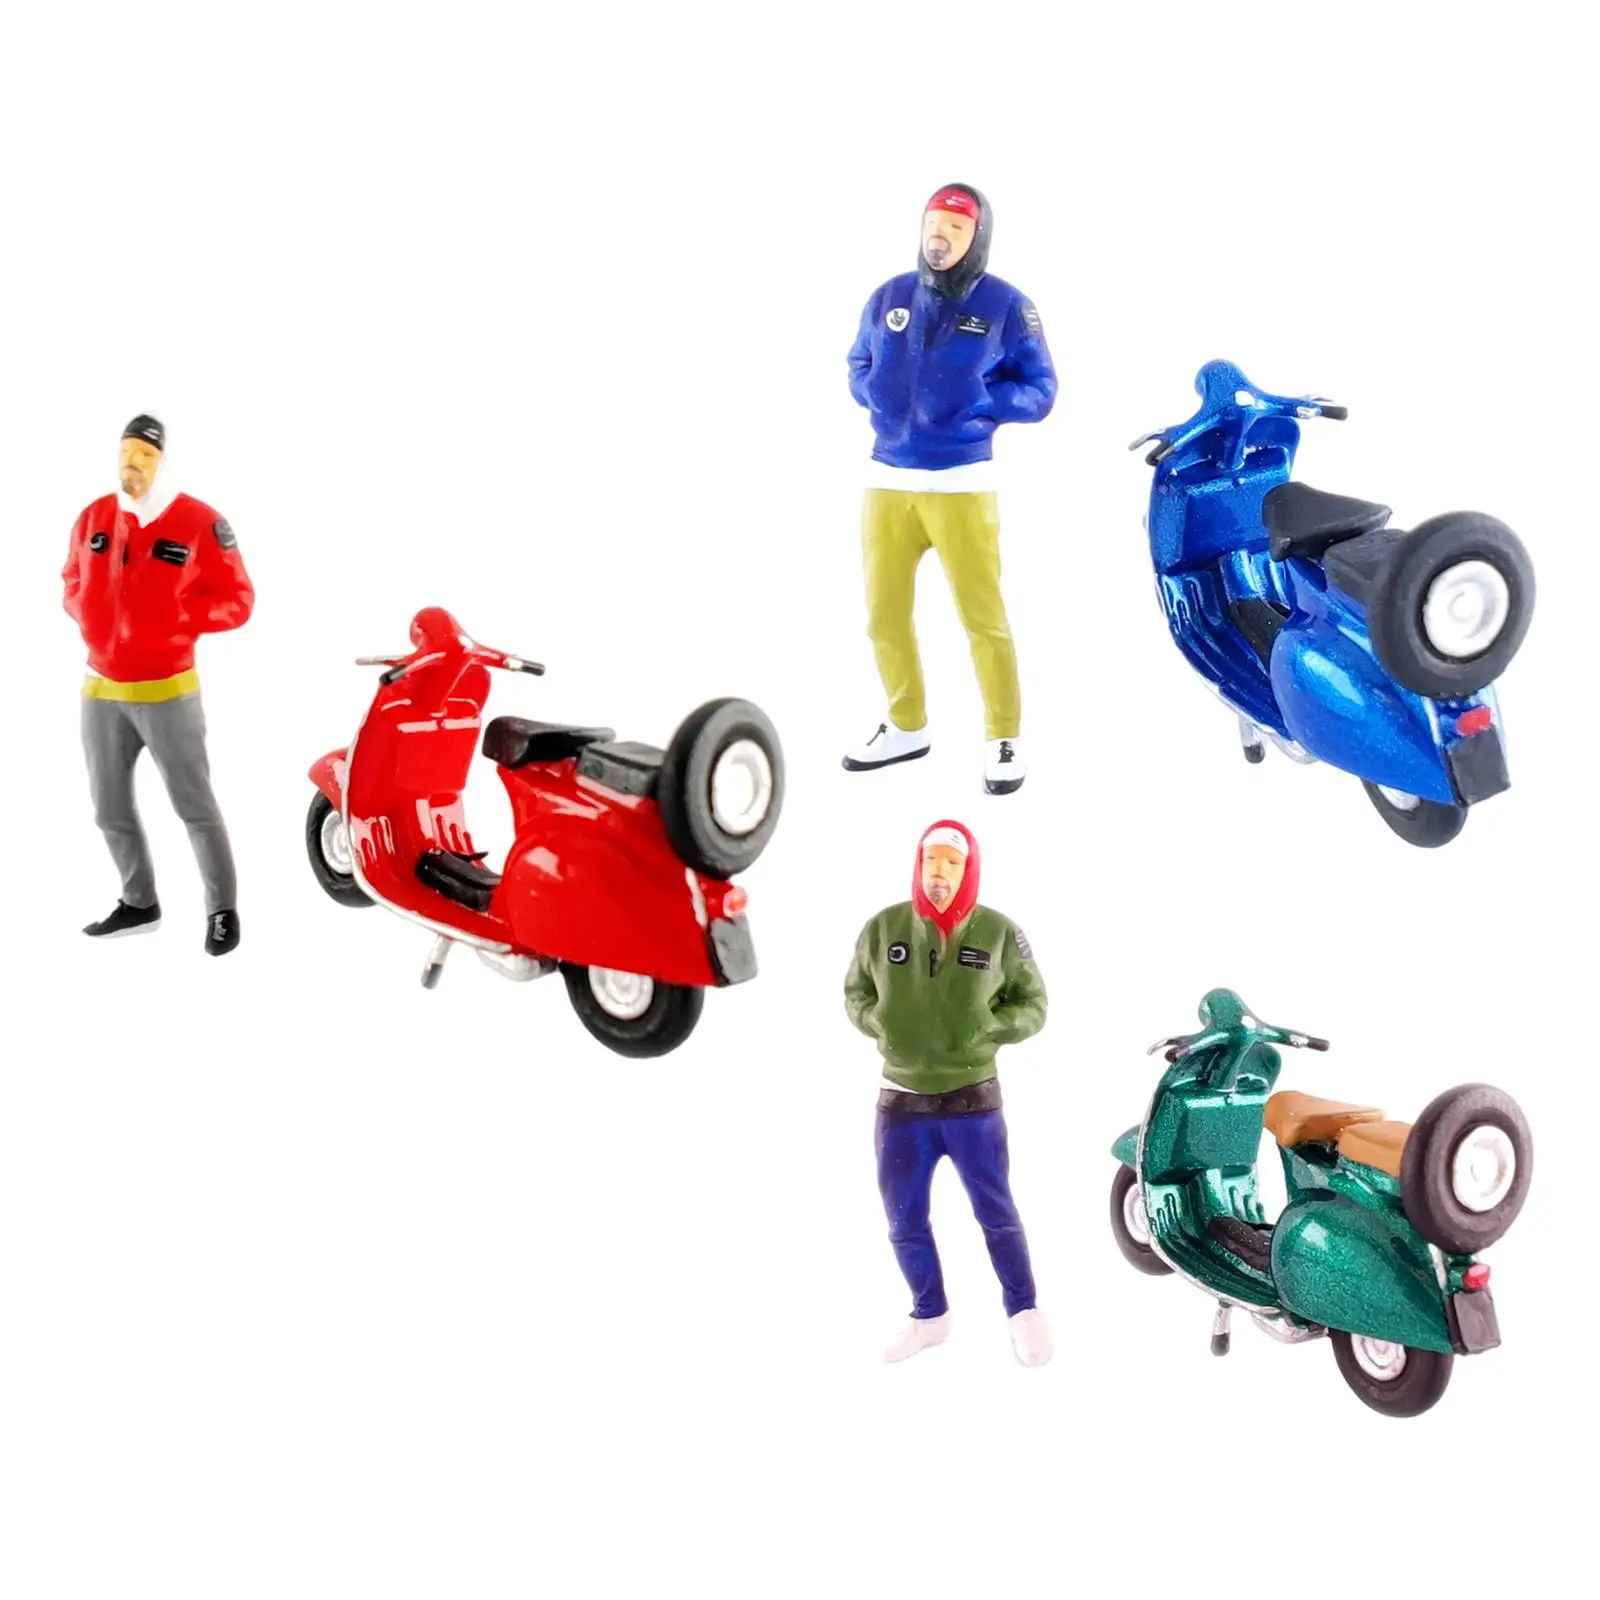 Hand Painted 1:64 Figure Bearded Brother Motorcycle Architecture Model Diorama Scenery Miniature Scenes Character Model Toy